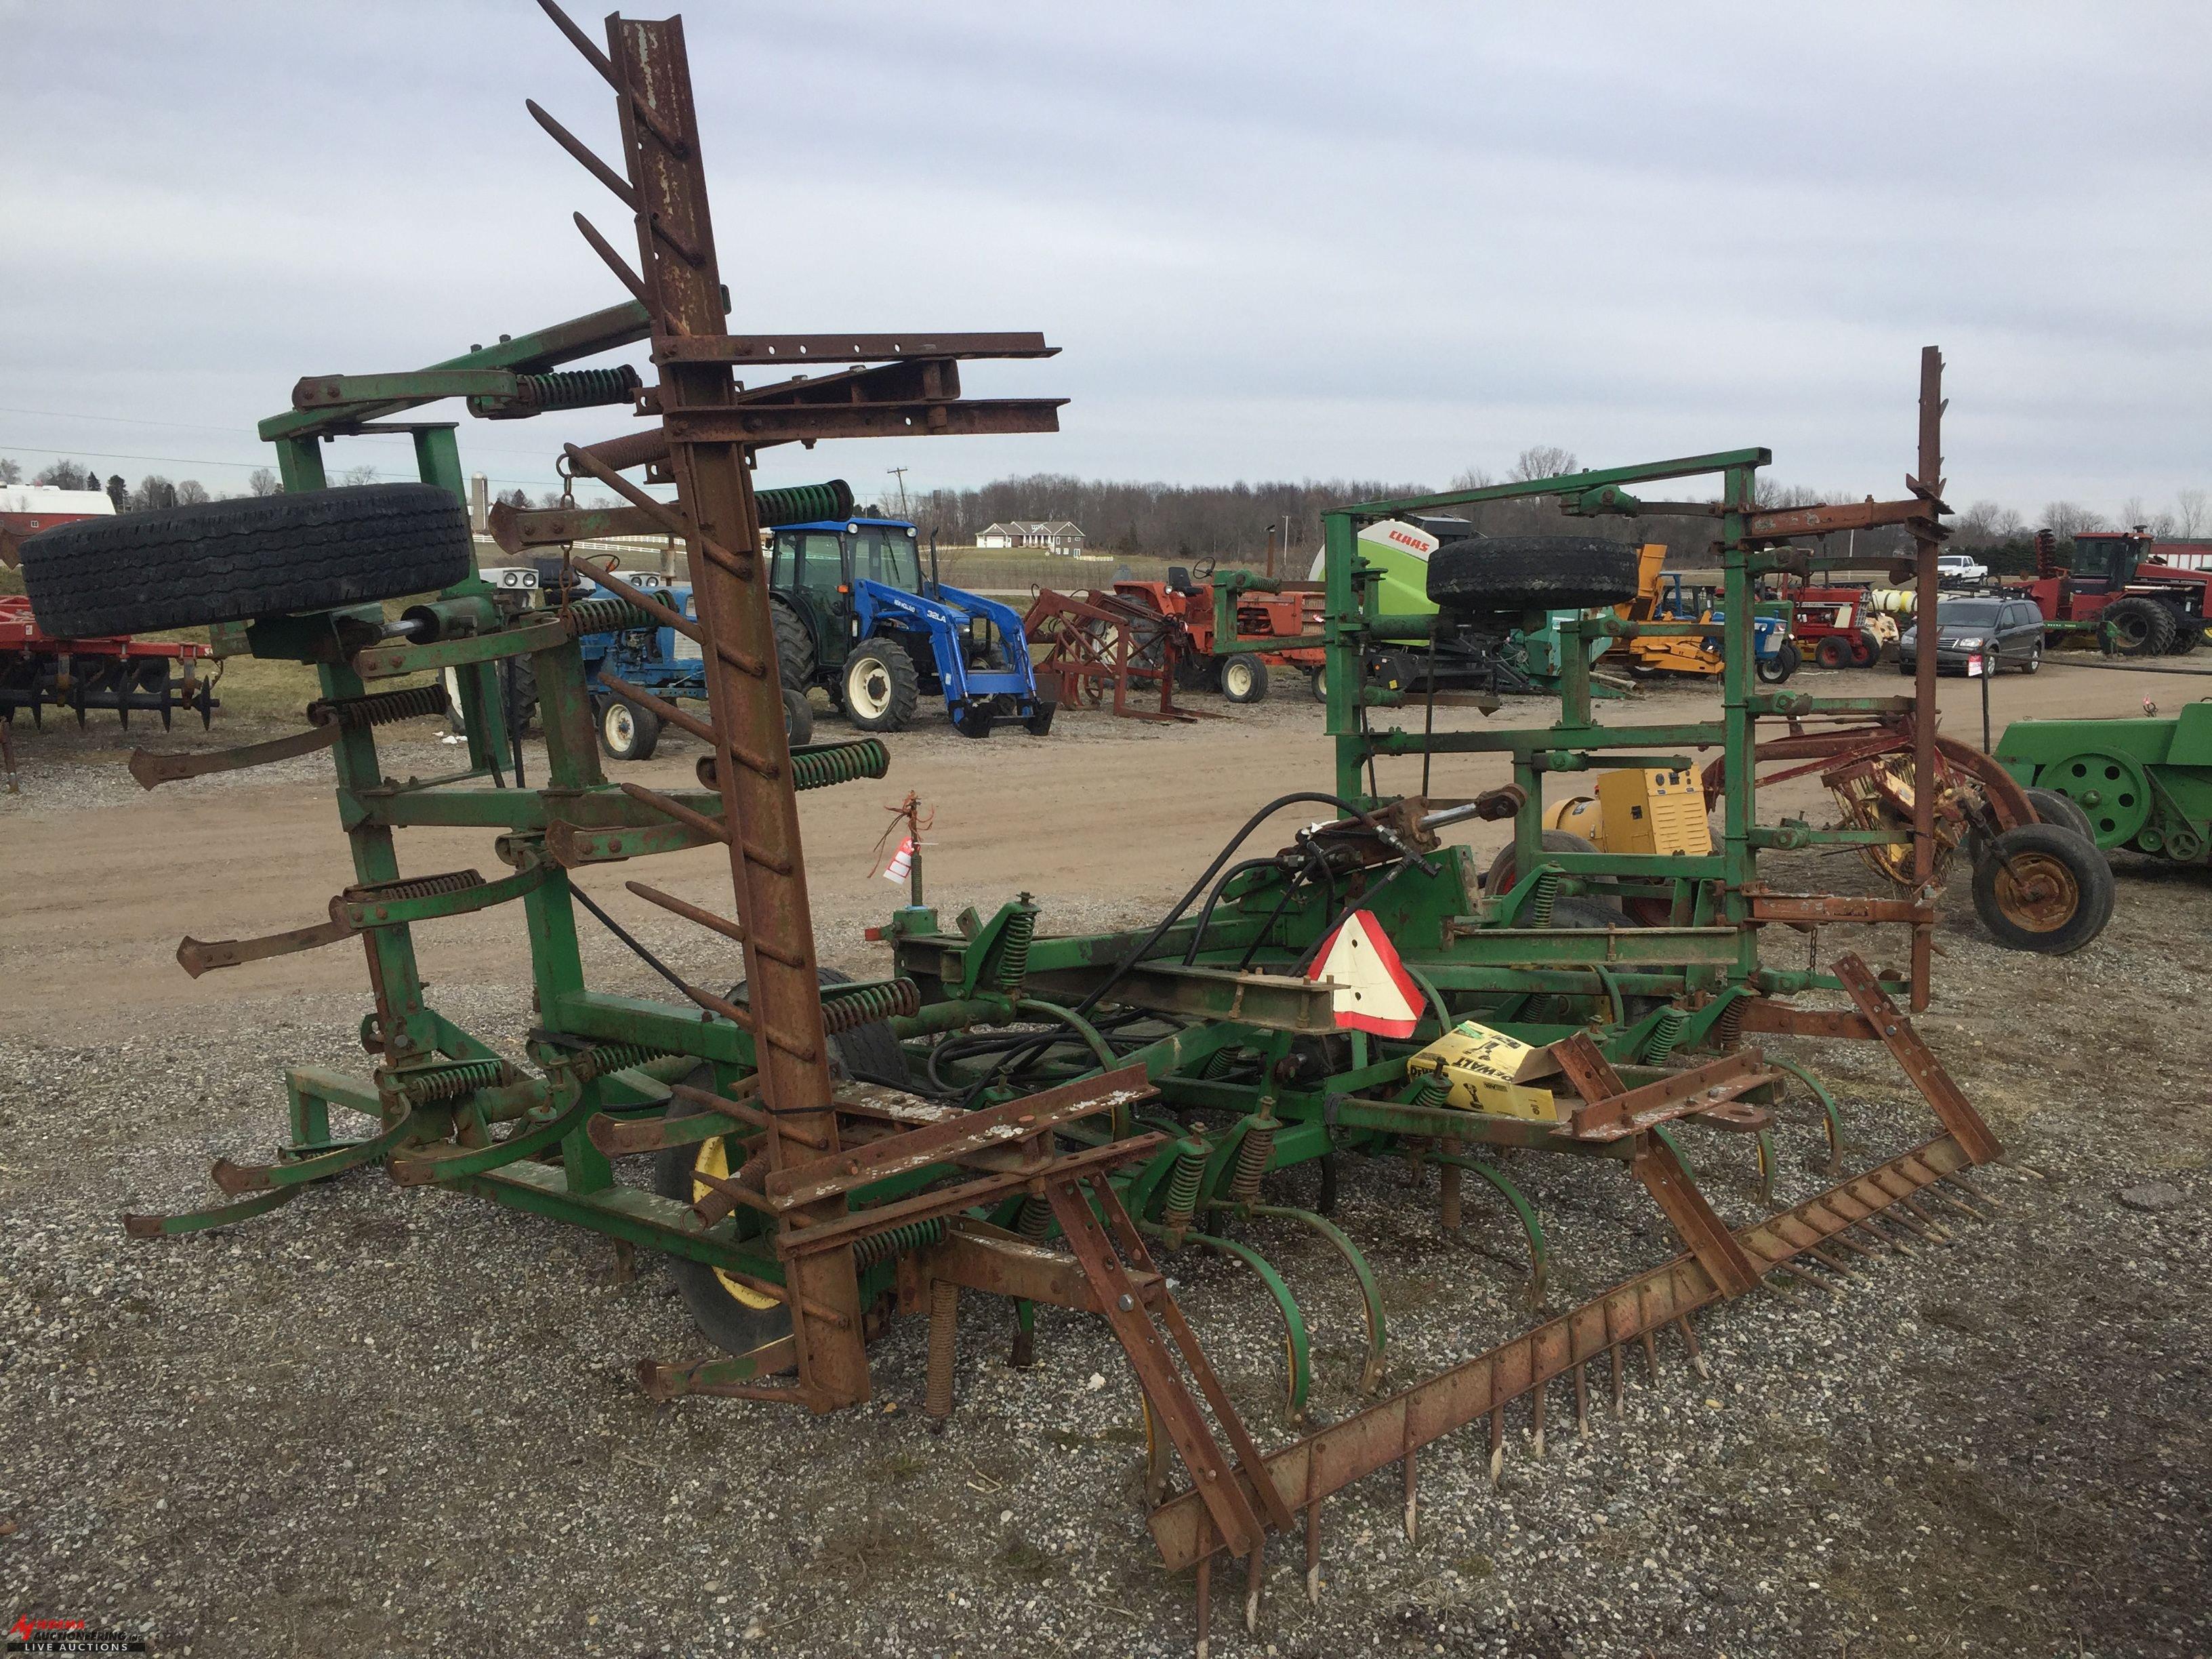 JOHN DEERE E1000 FIELD CULTIVATOR, WING FOLD, HITCH IS UNBOLTED (29312)